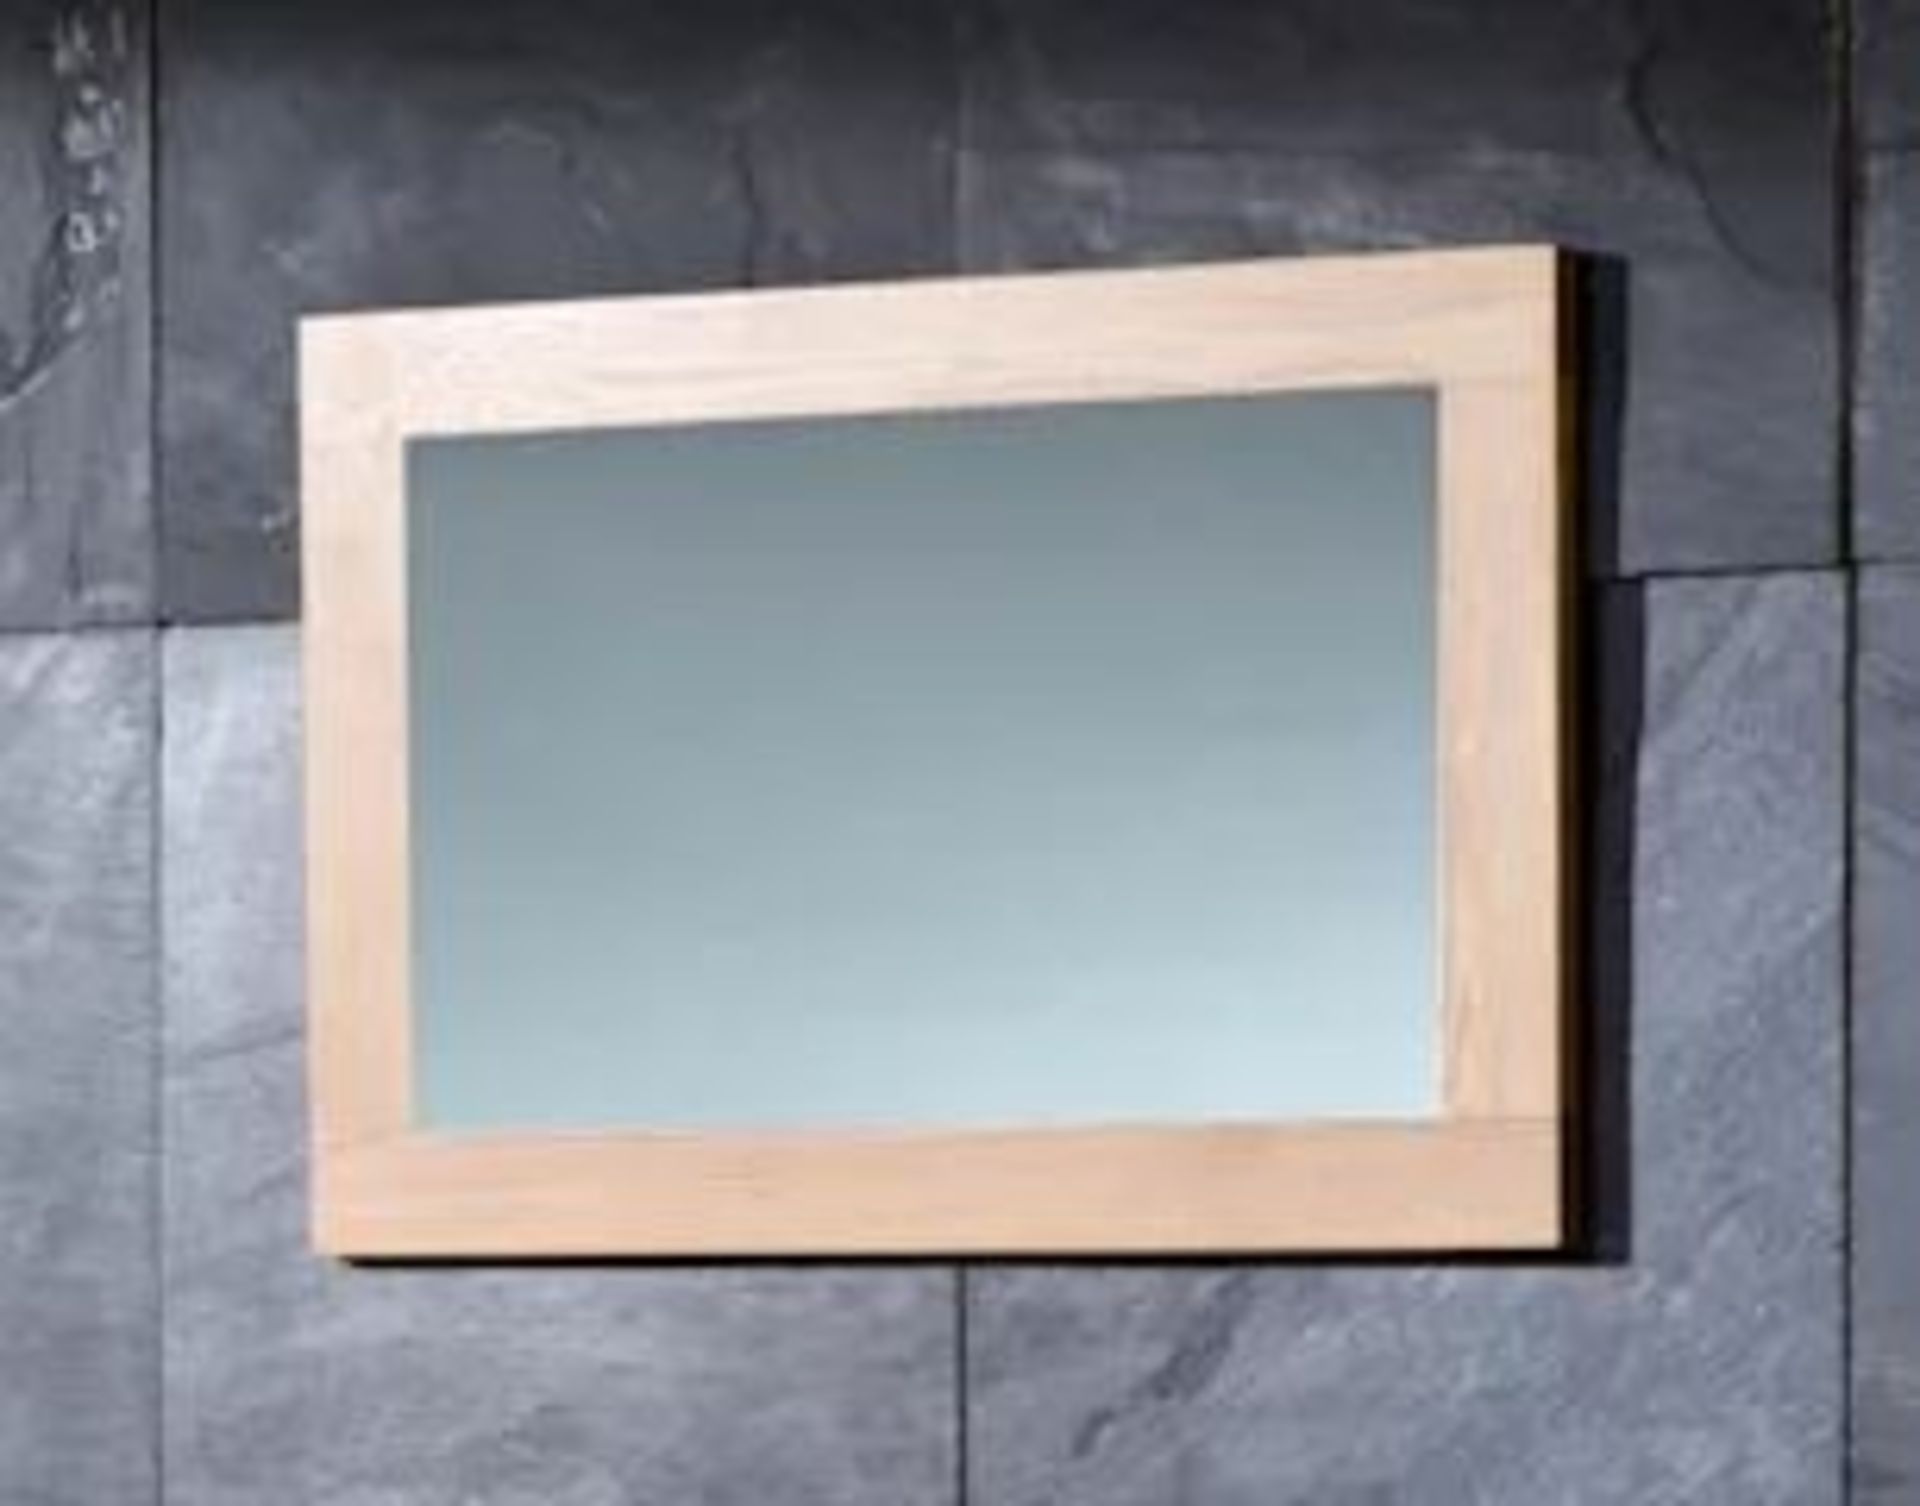 1 x Stonearth Large Bathroom Wall Mirror - American Solid Oak Frame With Bevelled Glass - Size: H750 - Image 11 of 12